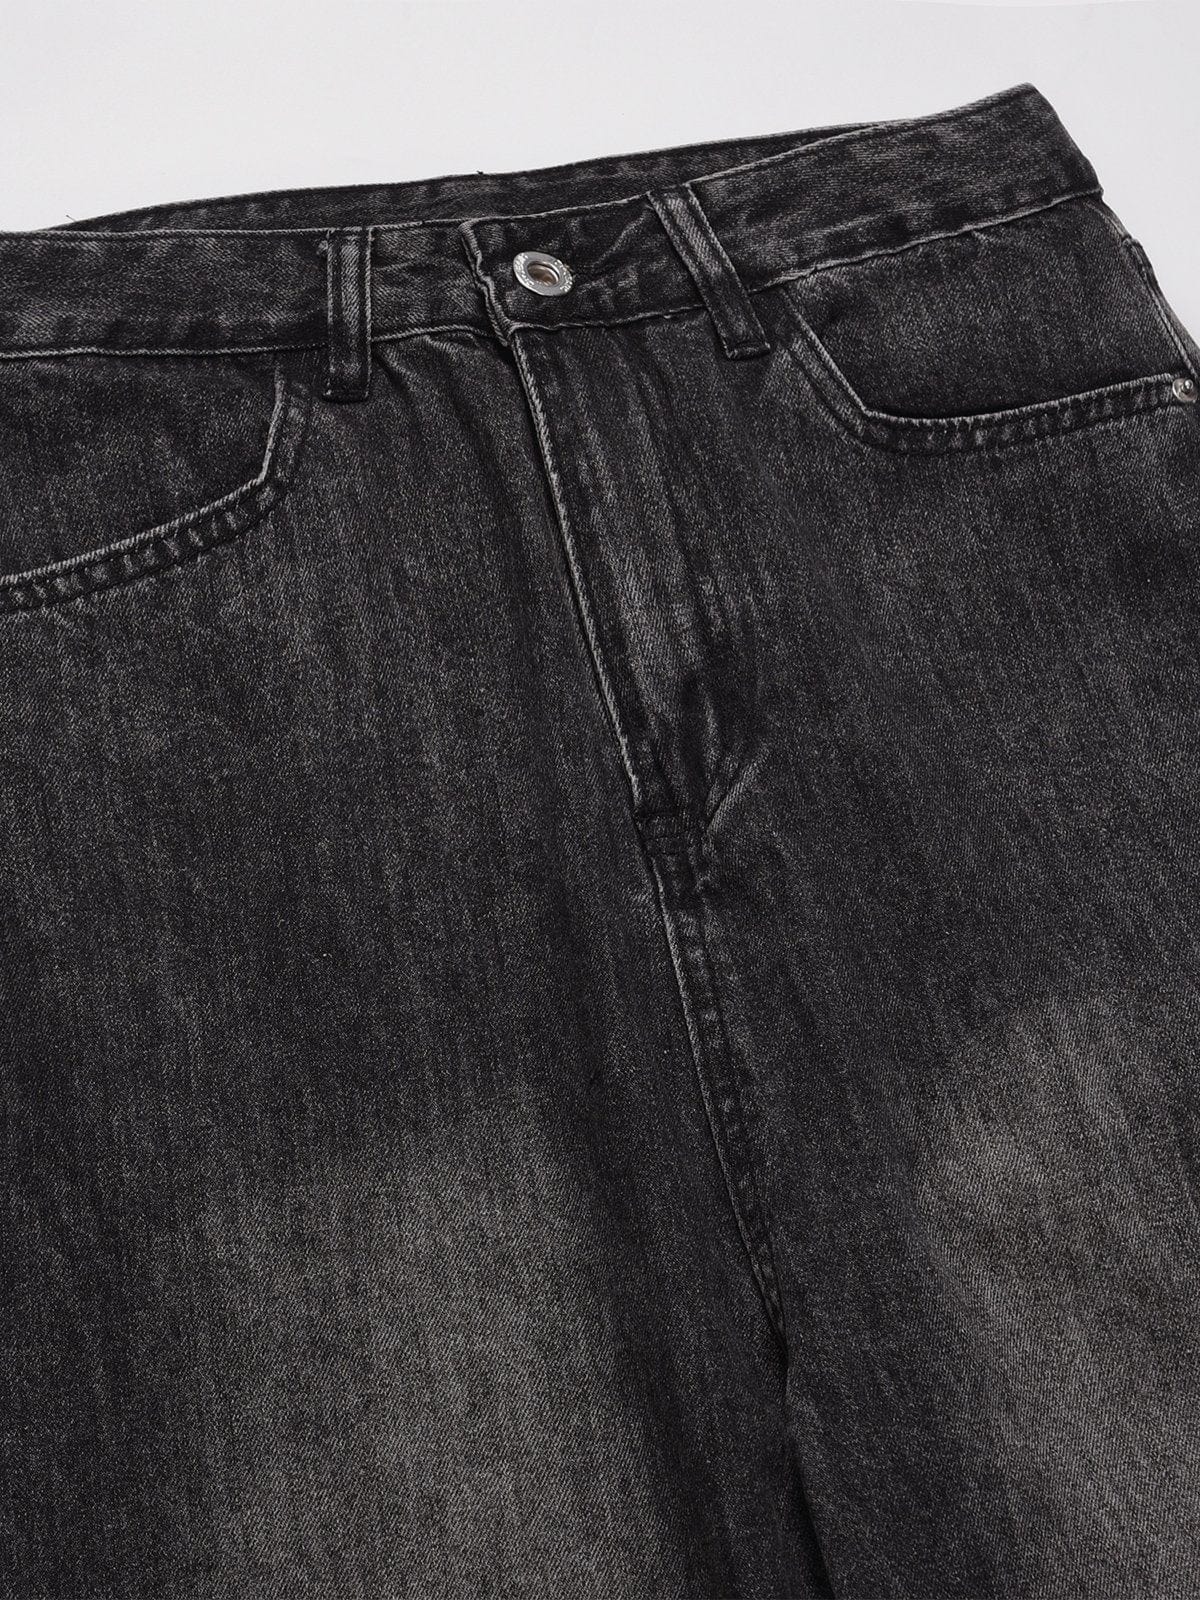 NEV Washed Distressed Solid Jeans